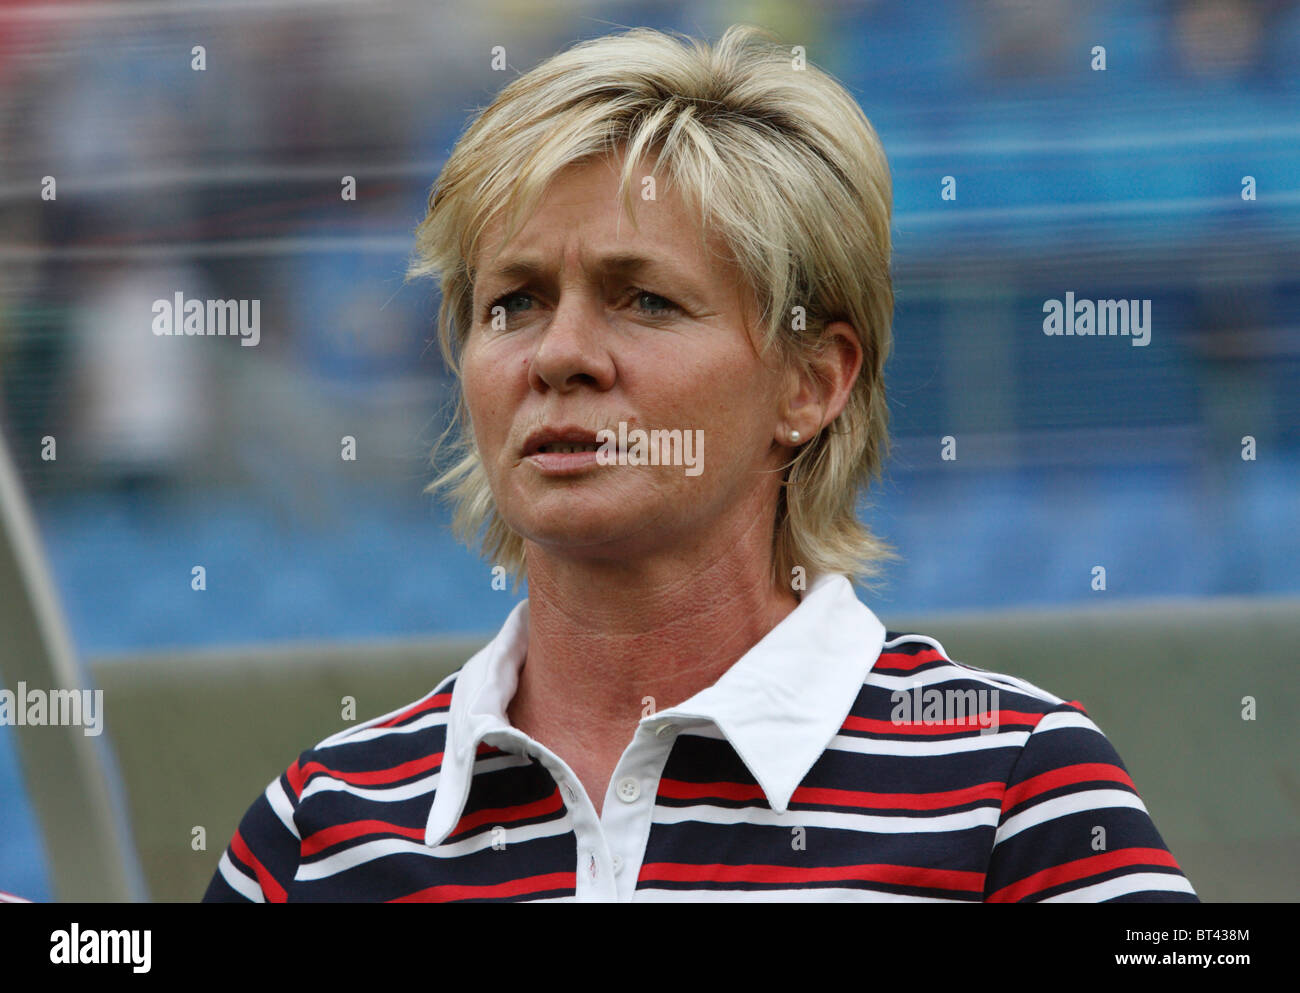 Germany head coach Silvia Neid on the bench prior to a Beijing Olympic Games women's soccer tournament match against Nigeria. Stock Photo